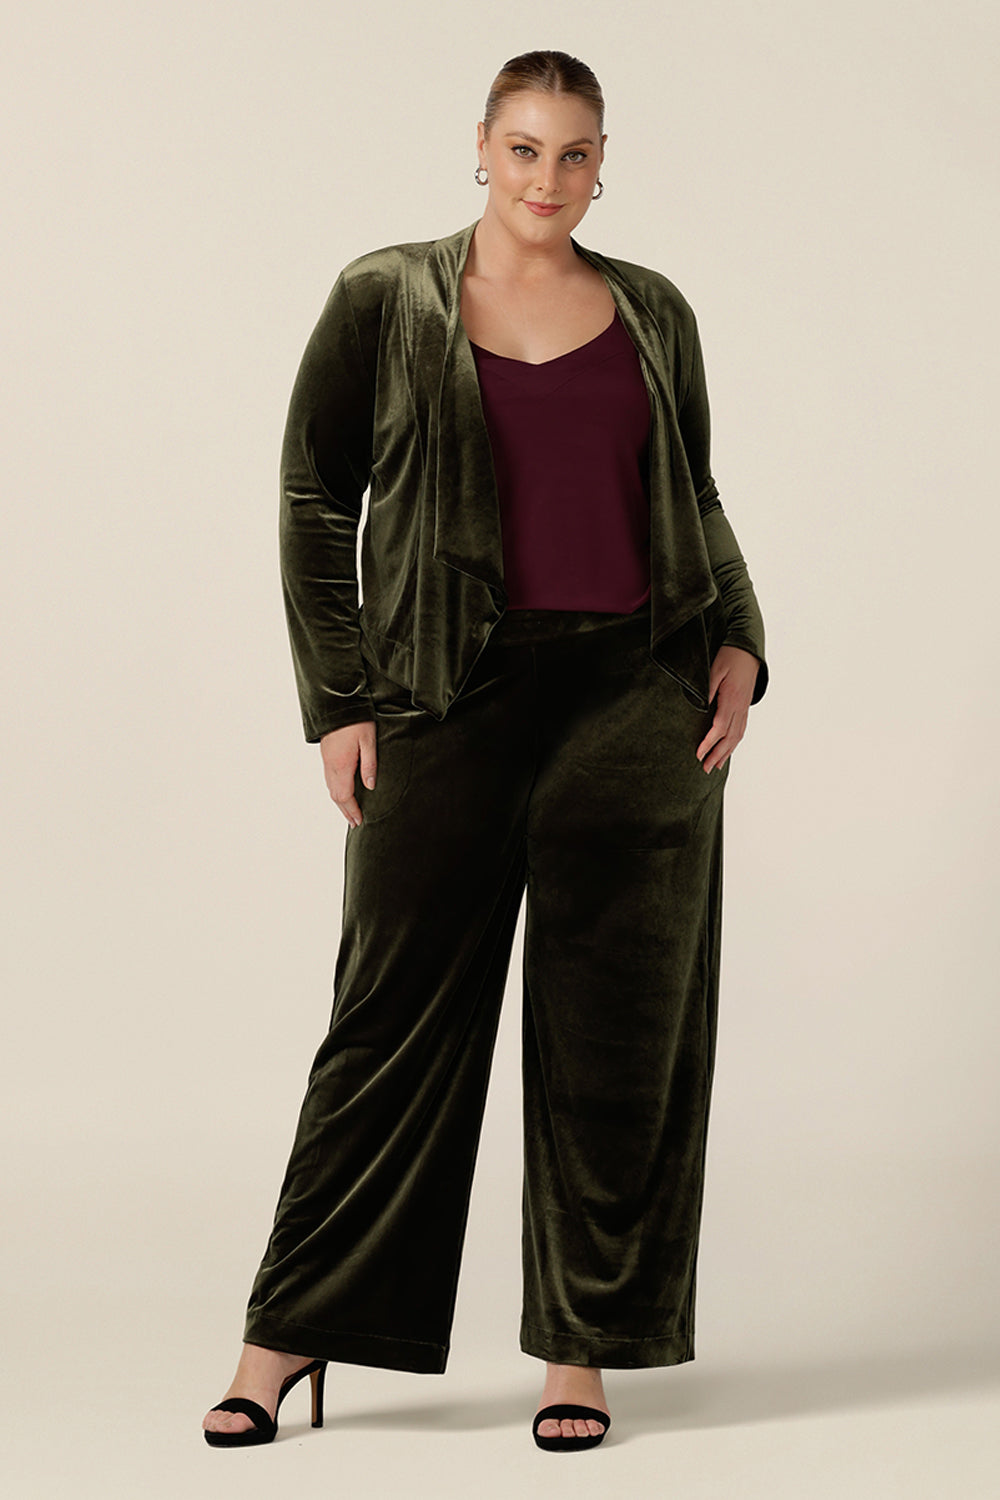 The best cocktail pant suit for women with curve, the Deni Pant and Romy Jacket wear together with a plum cami top for a lougewear tuxedo look. Straight, wide leg pants in green velour, these evening trousers are pull on pants and comfortable in stretch fabric. Shop plus size occasion and cocktail attire online at Australian fashion brand, Leina & Fleur.